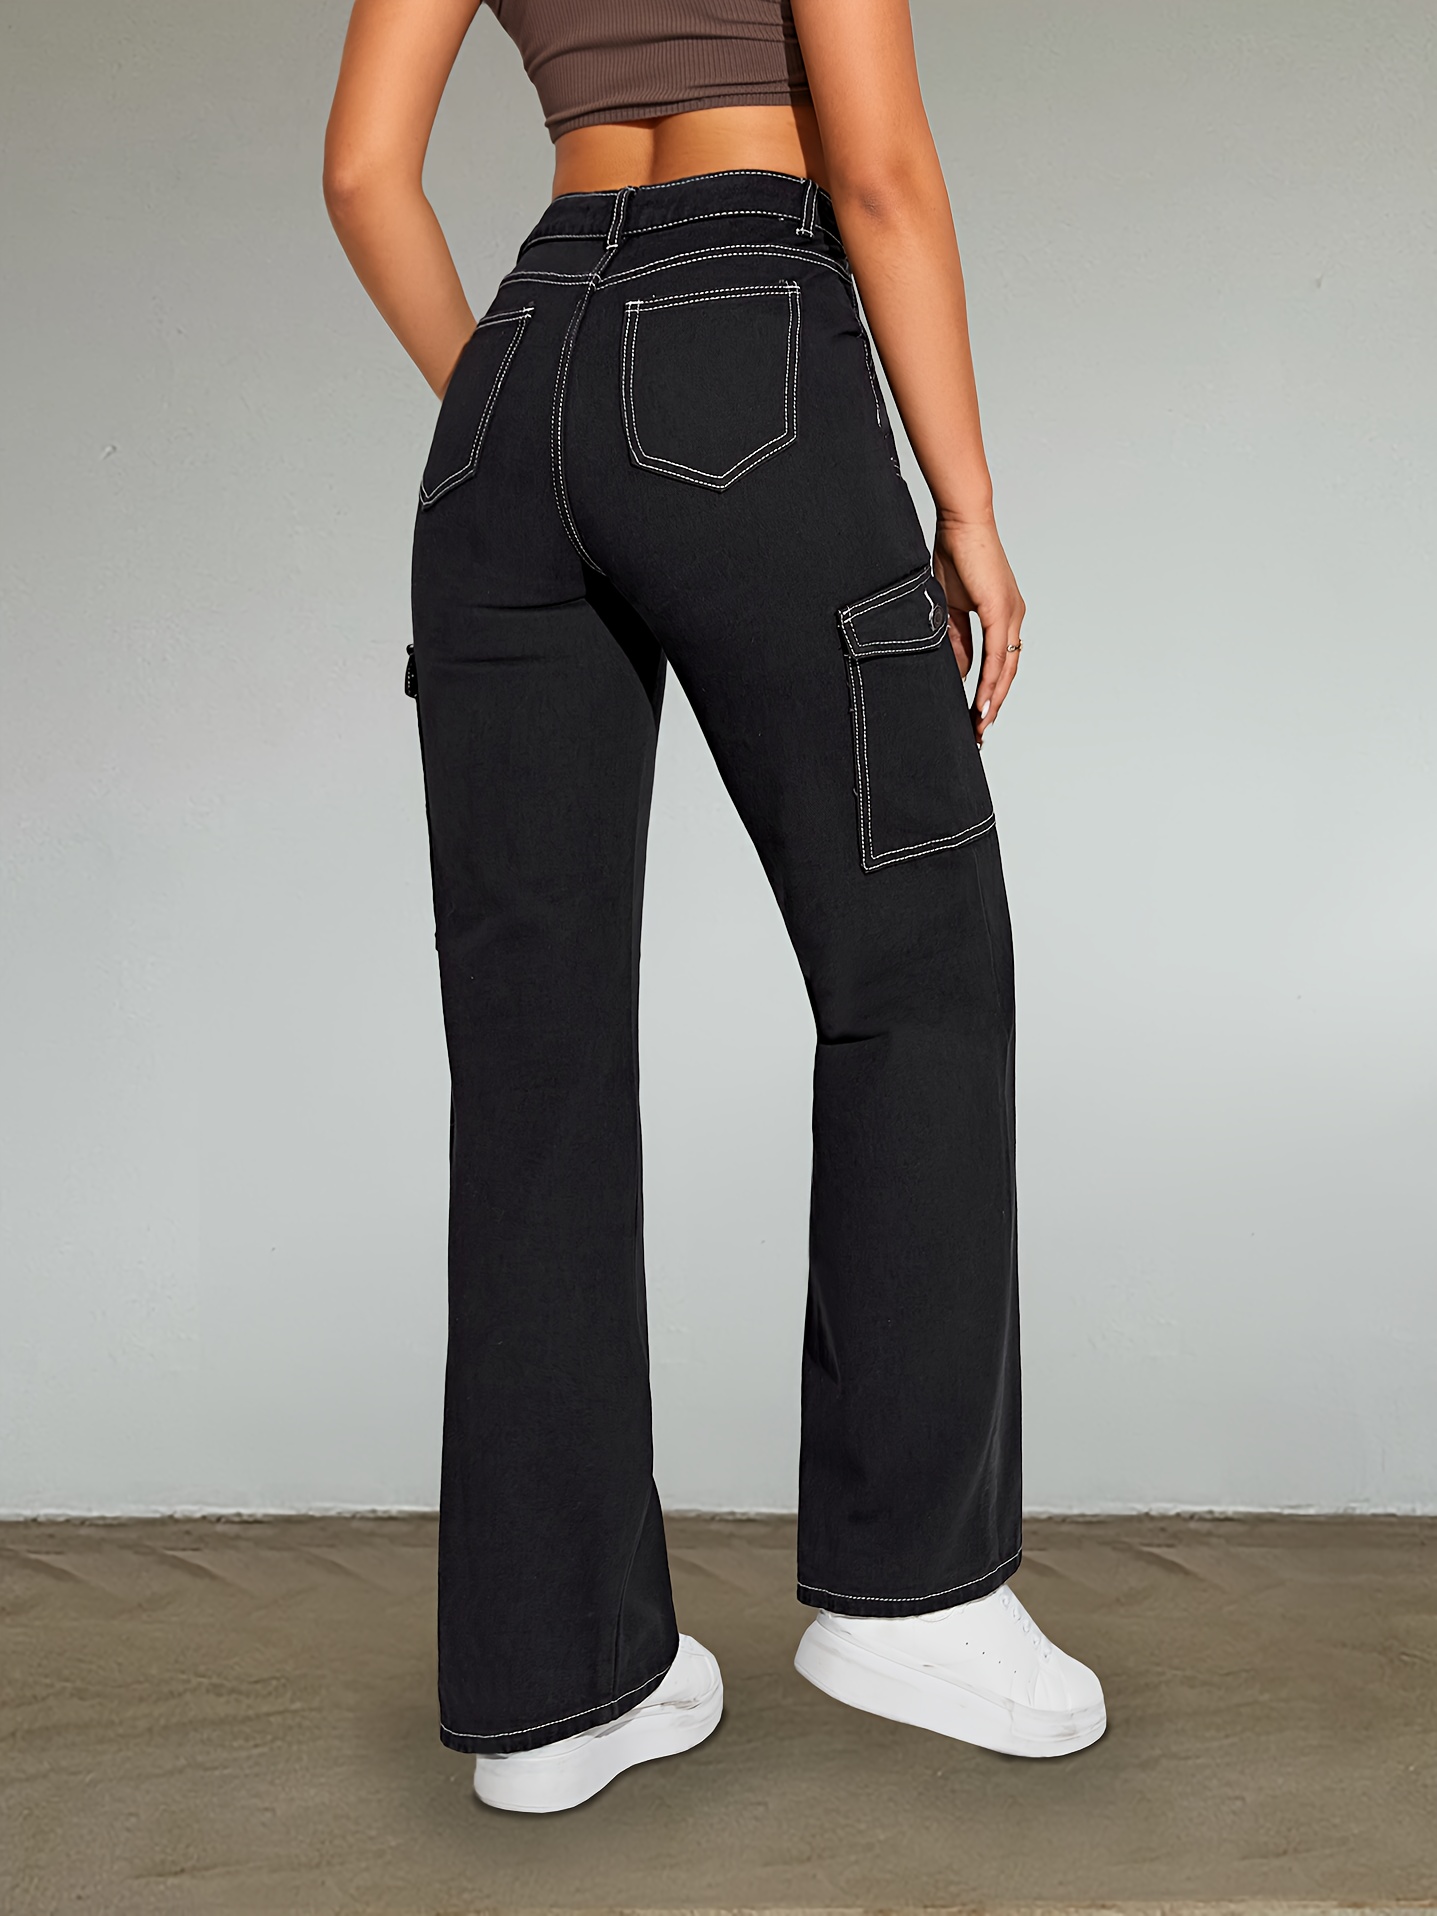 Black Flap Pockets Straight Jeans Loose Fit Non stretch High